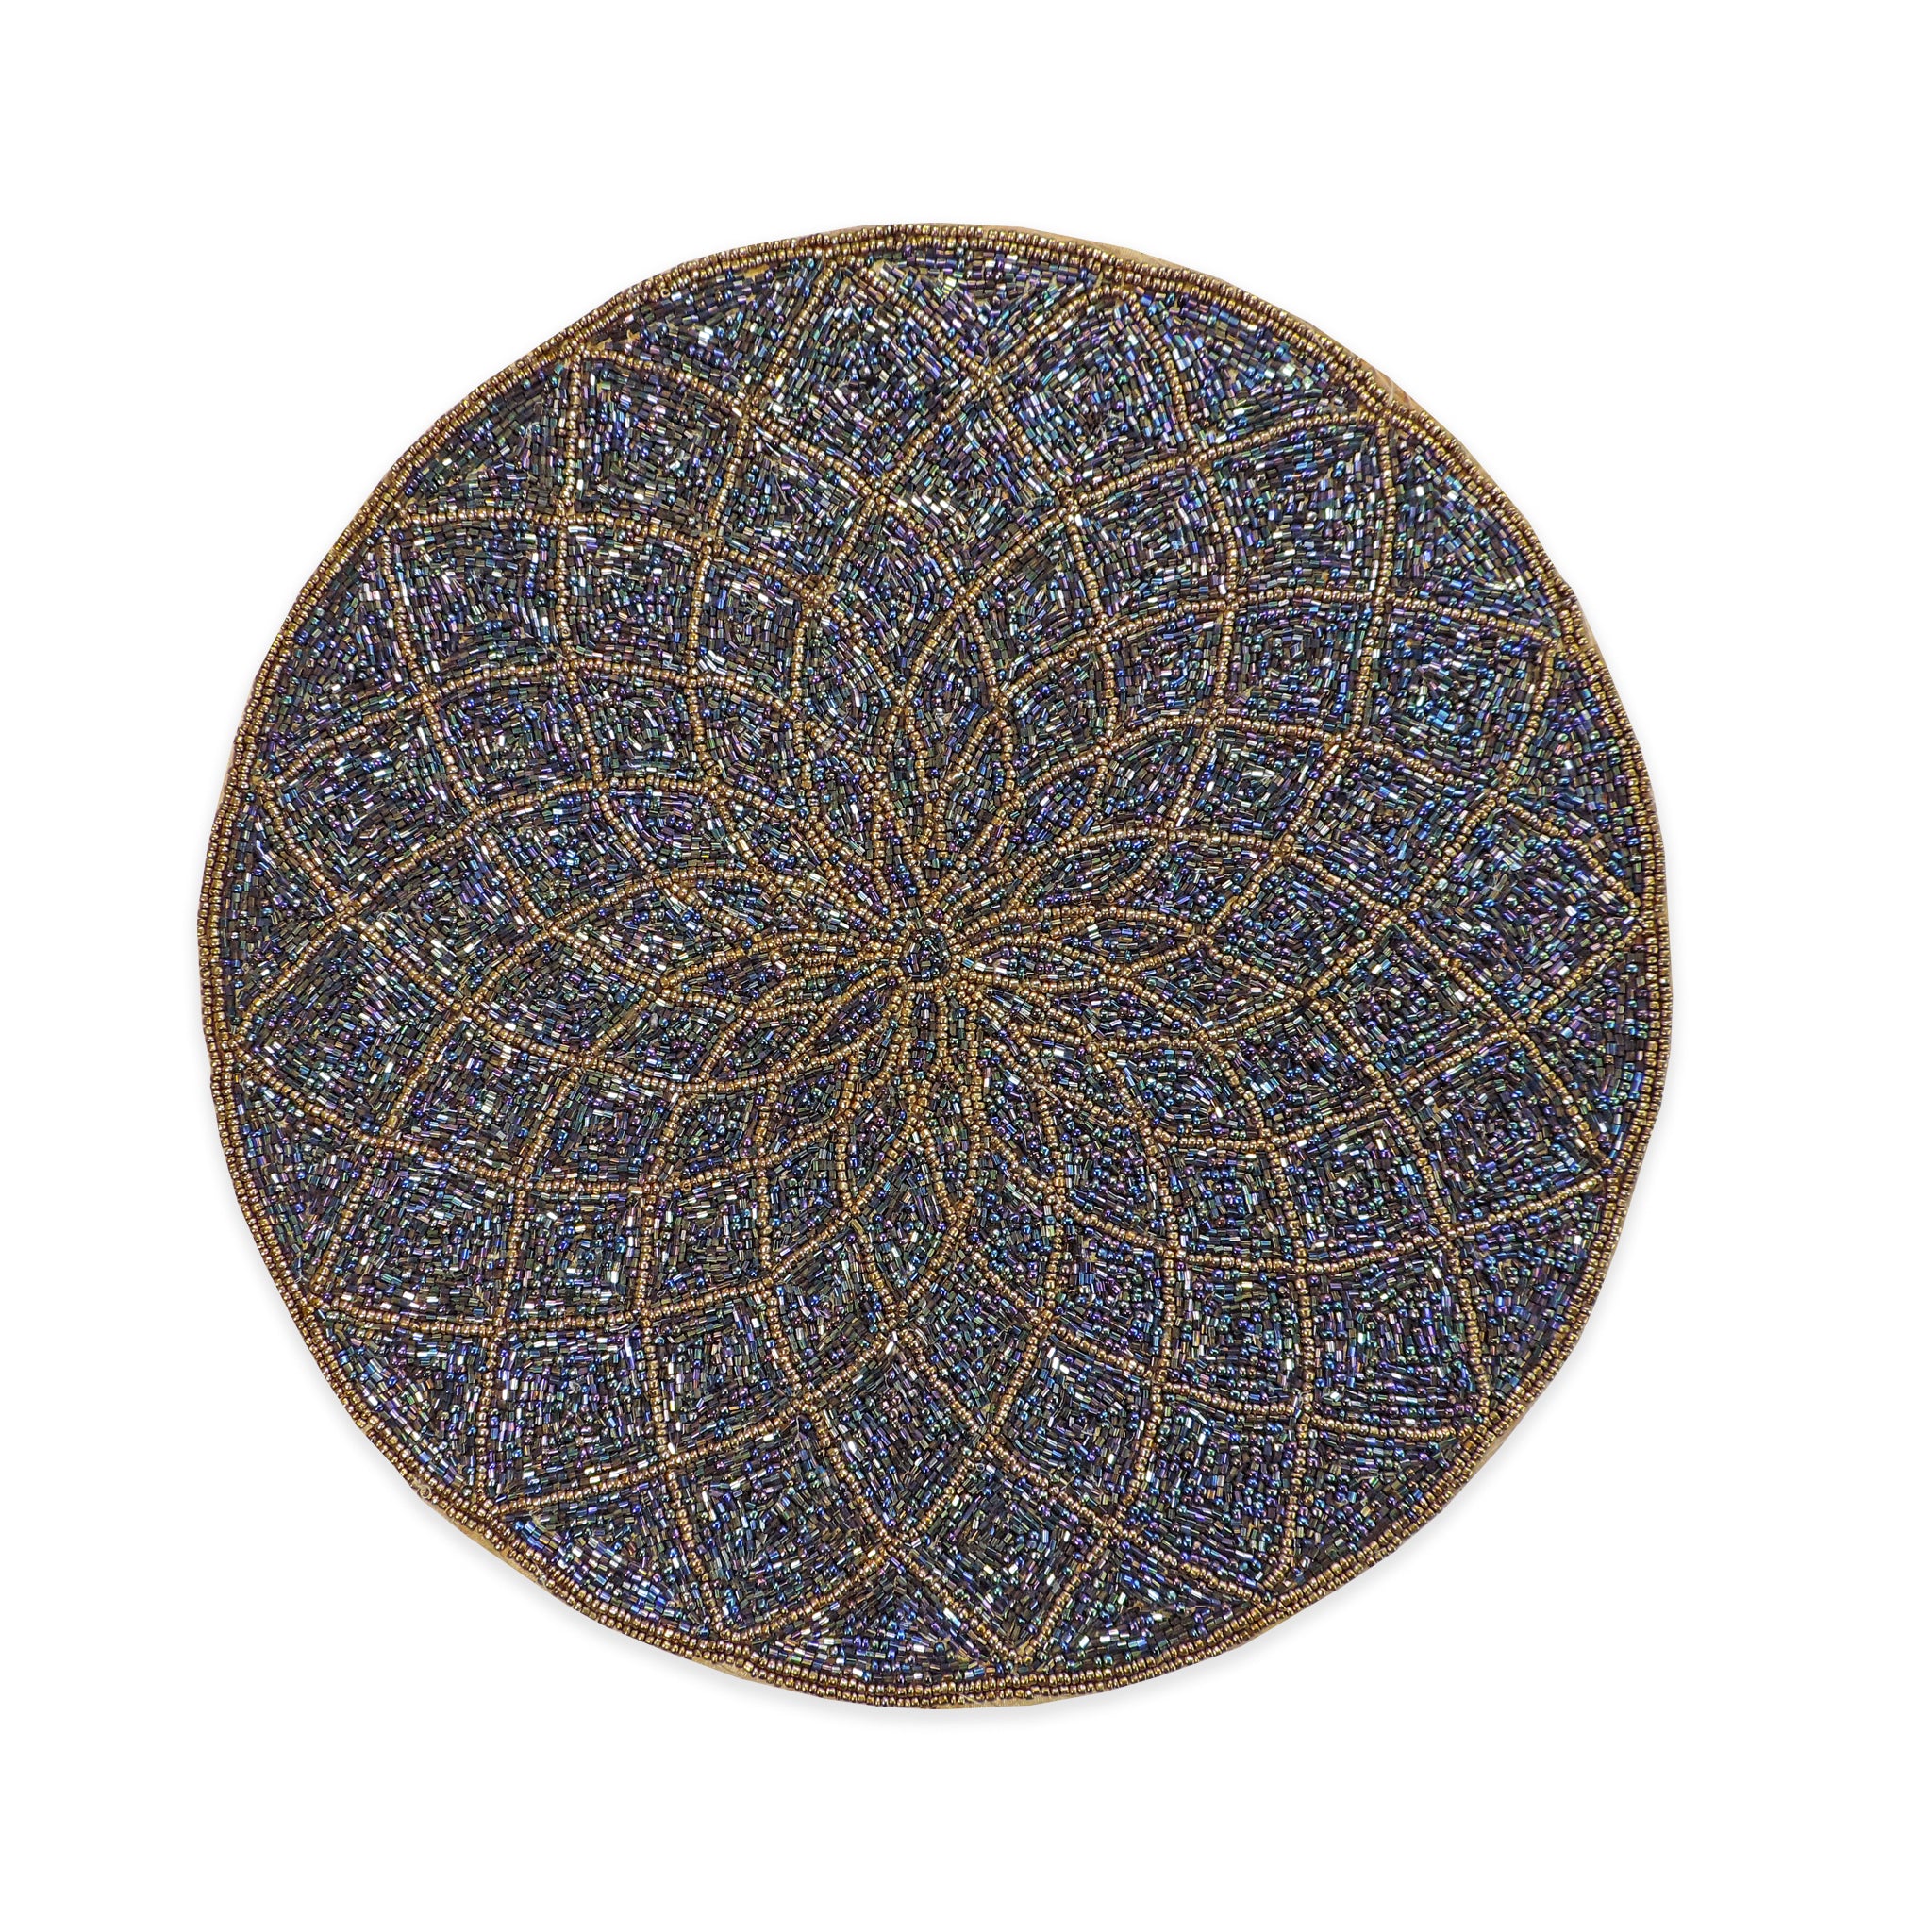 Glass Bead Embroidered Placemats, Chargers / Set of 2 / 14in. Round / Blue